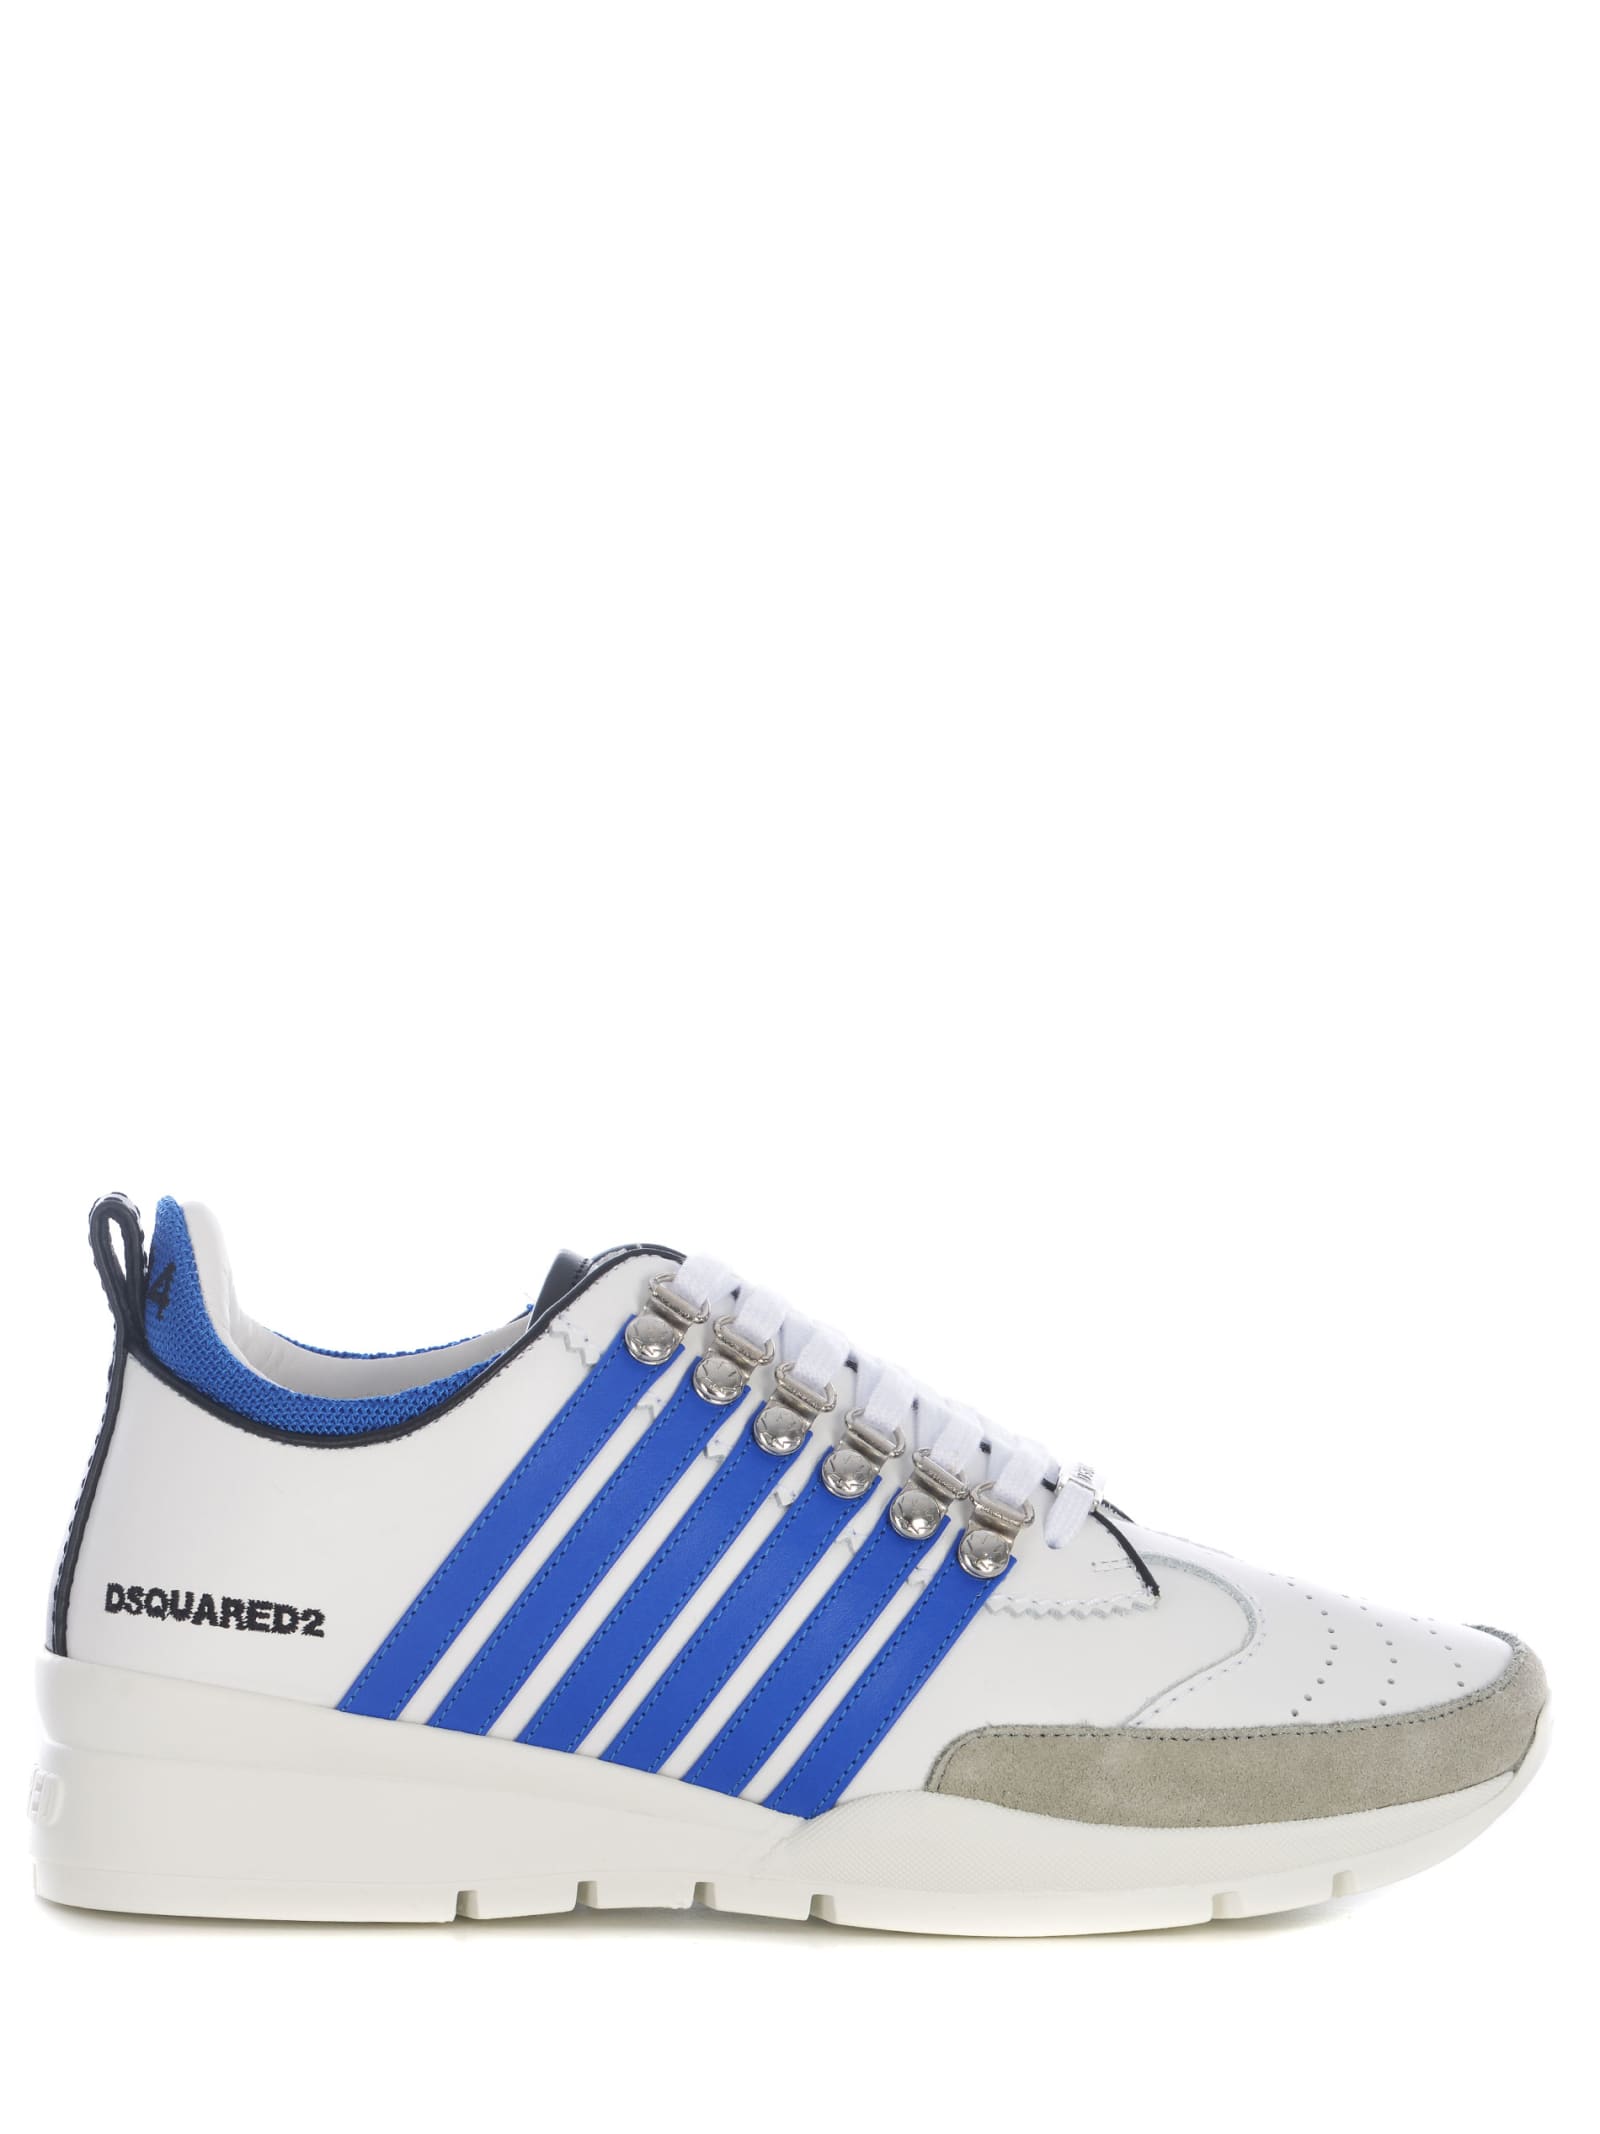 Dsquared2 Legendary Striped Almond Toe Sneakers